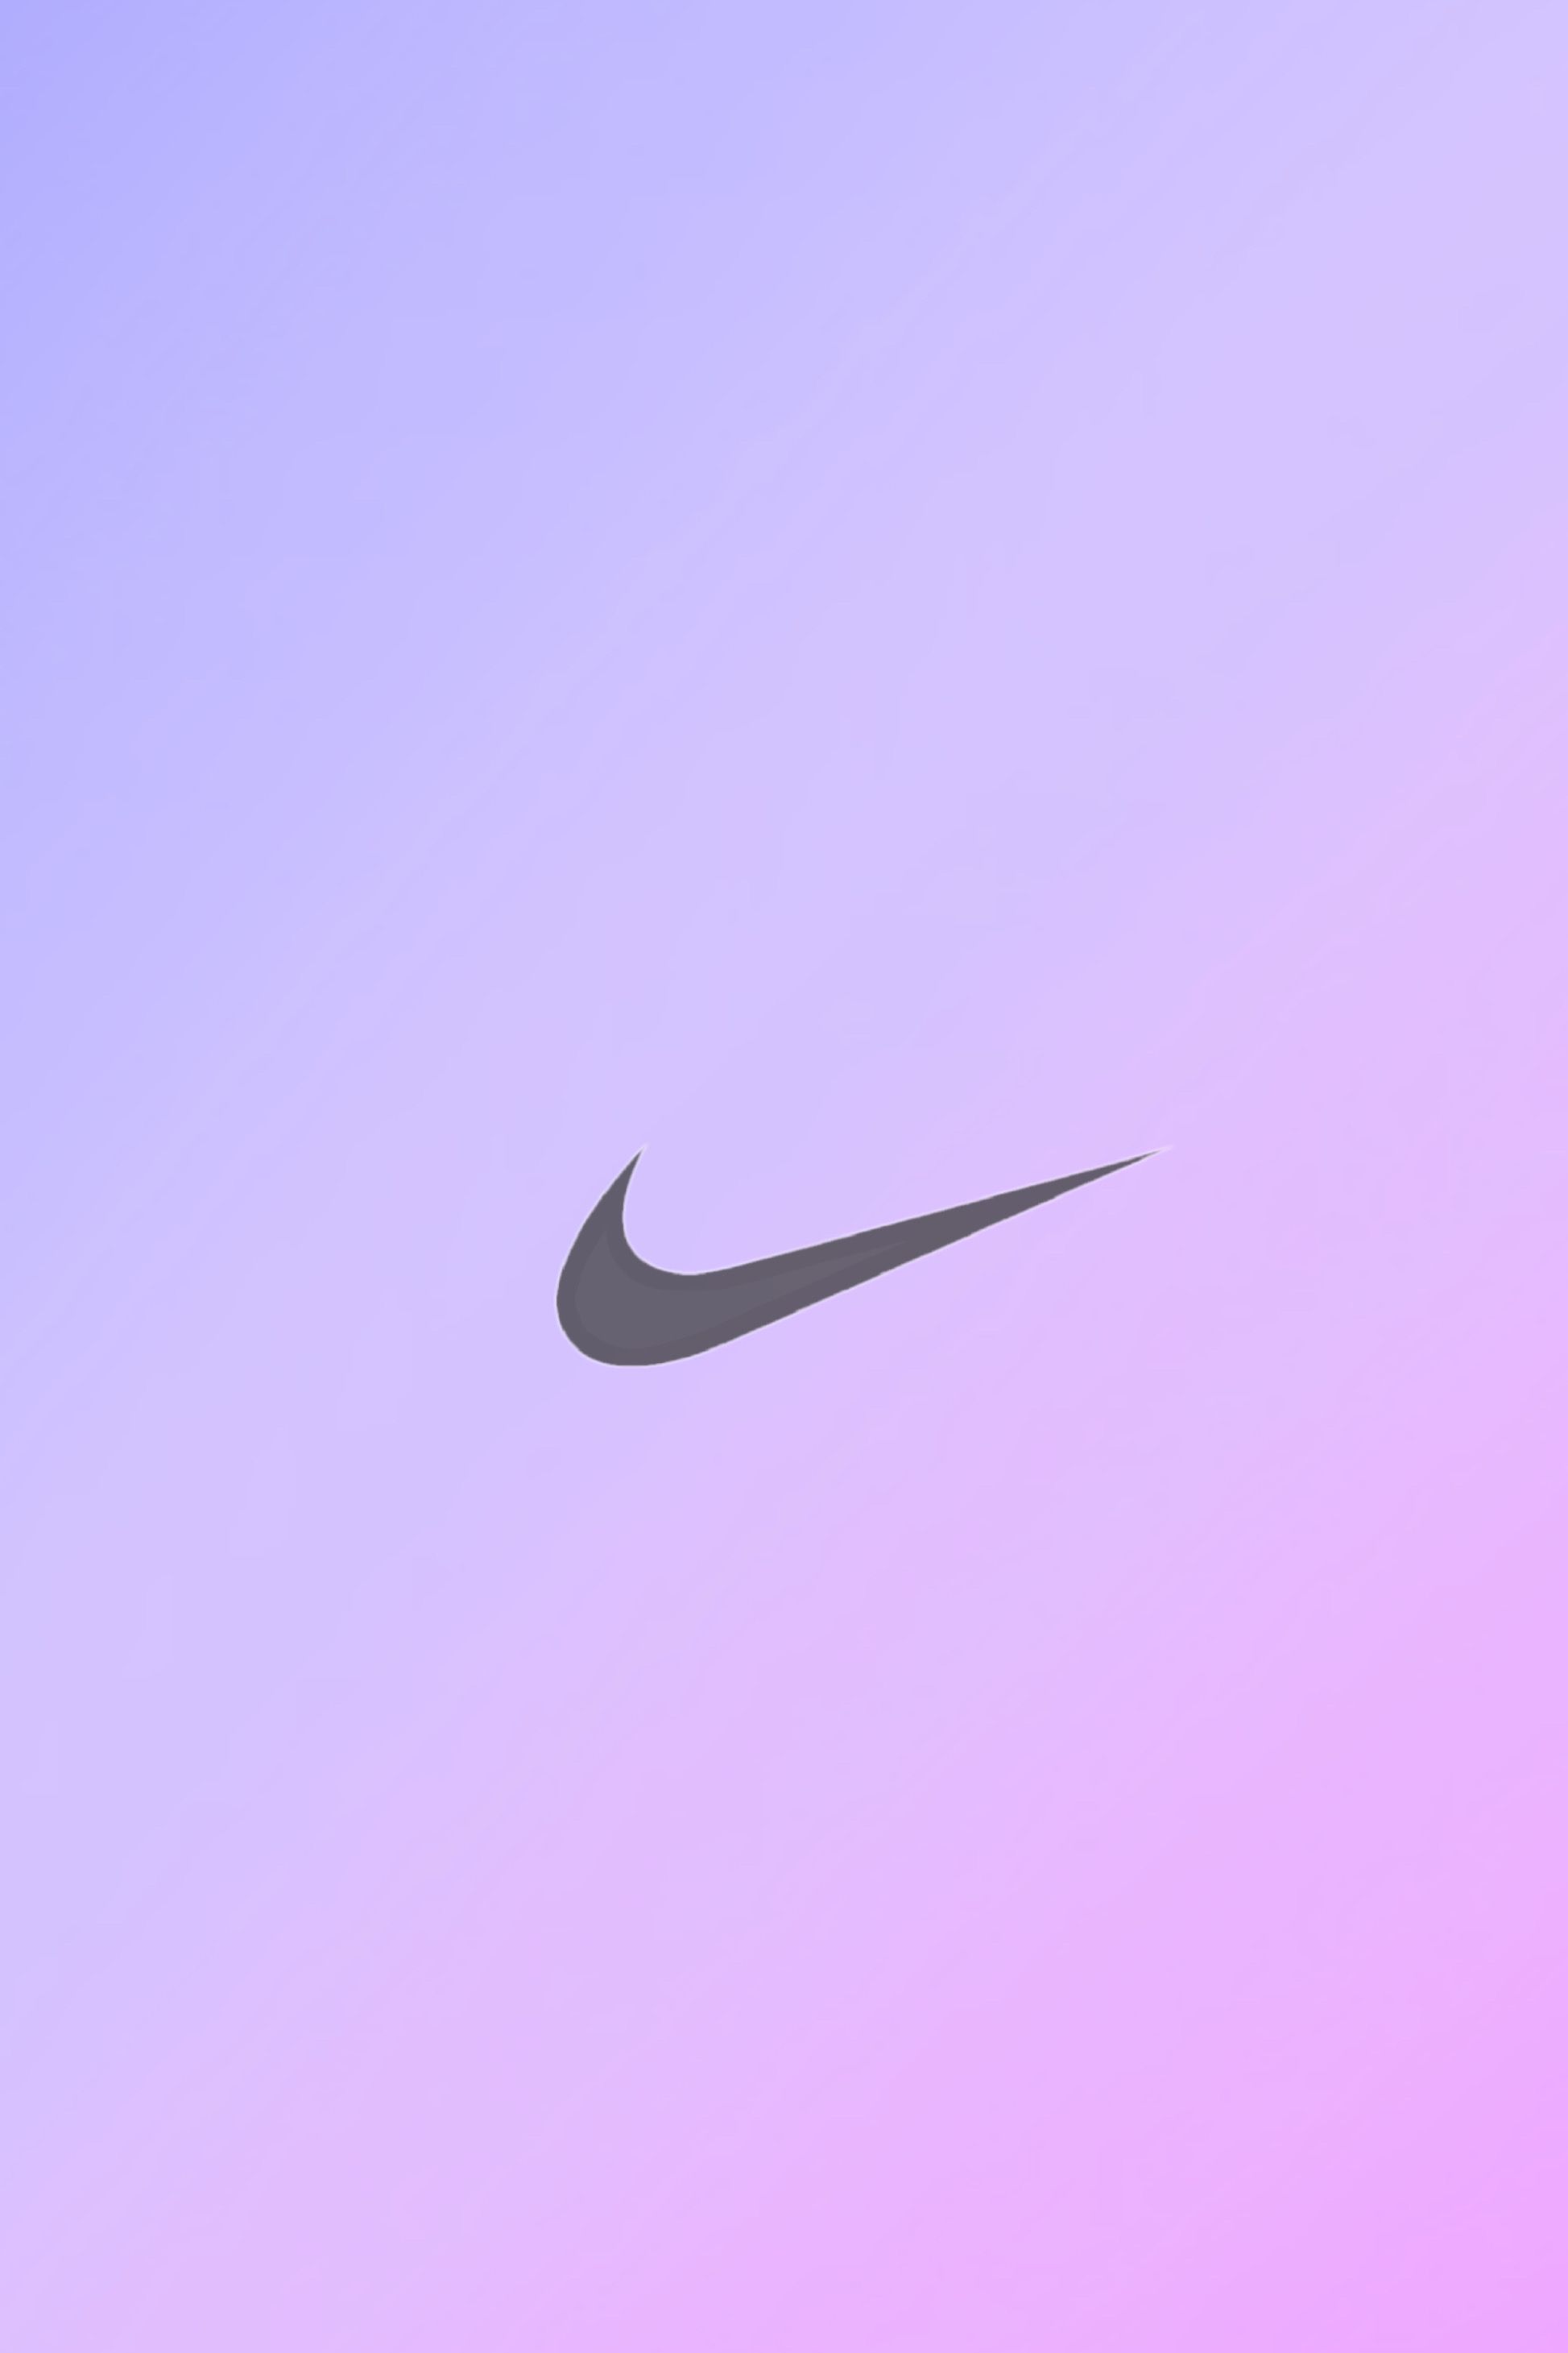 Ombré pink and purple Nike wallpaper. Pink nike wallpaper, Nike wallpaper, Pink wallpaper iphone